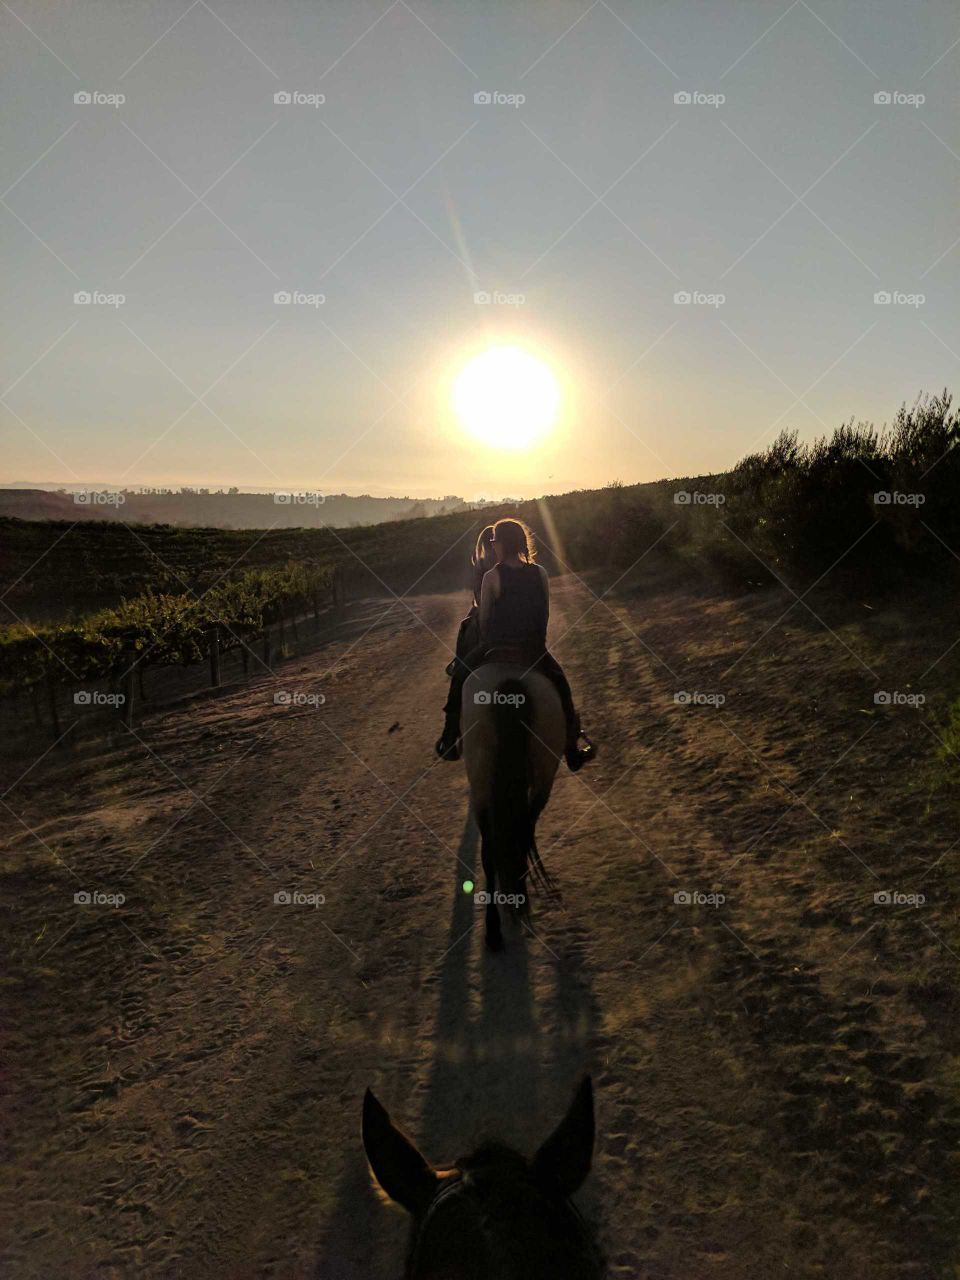 riding into the sunset